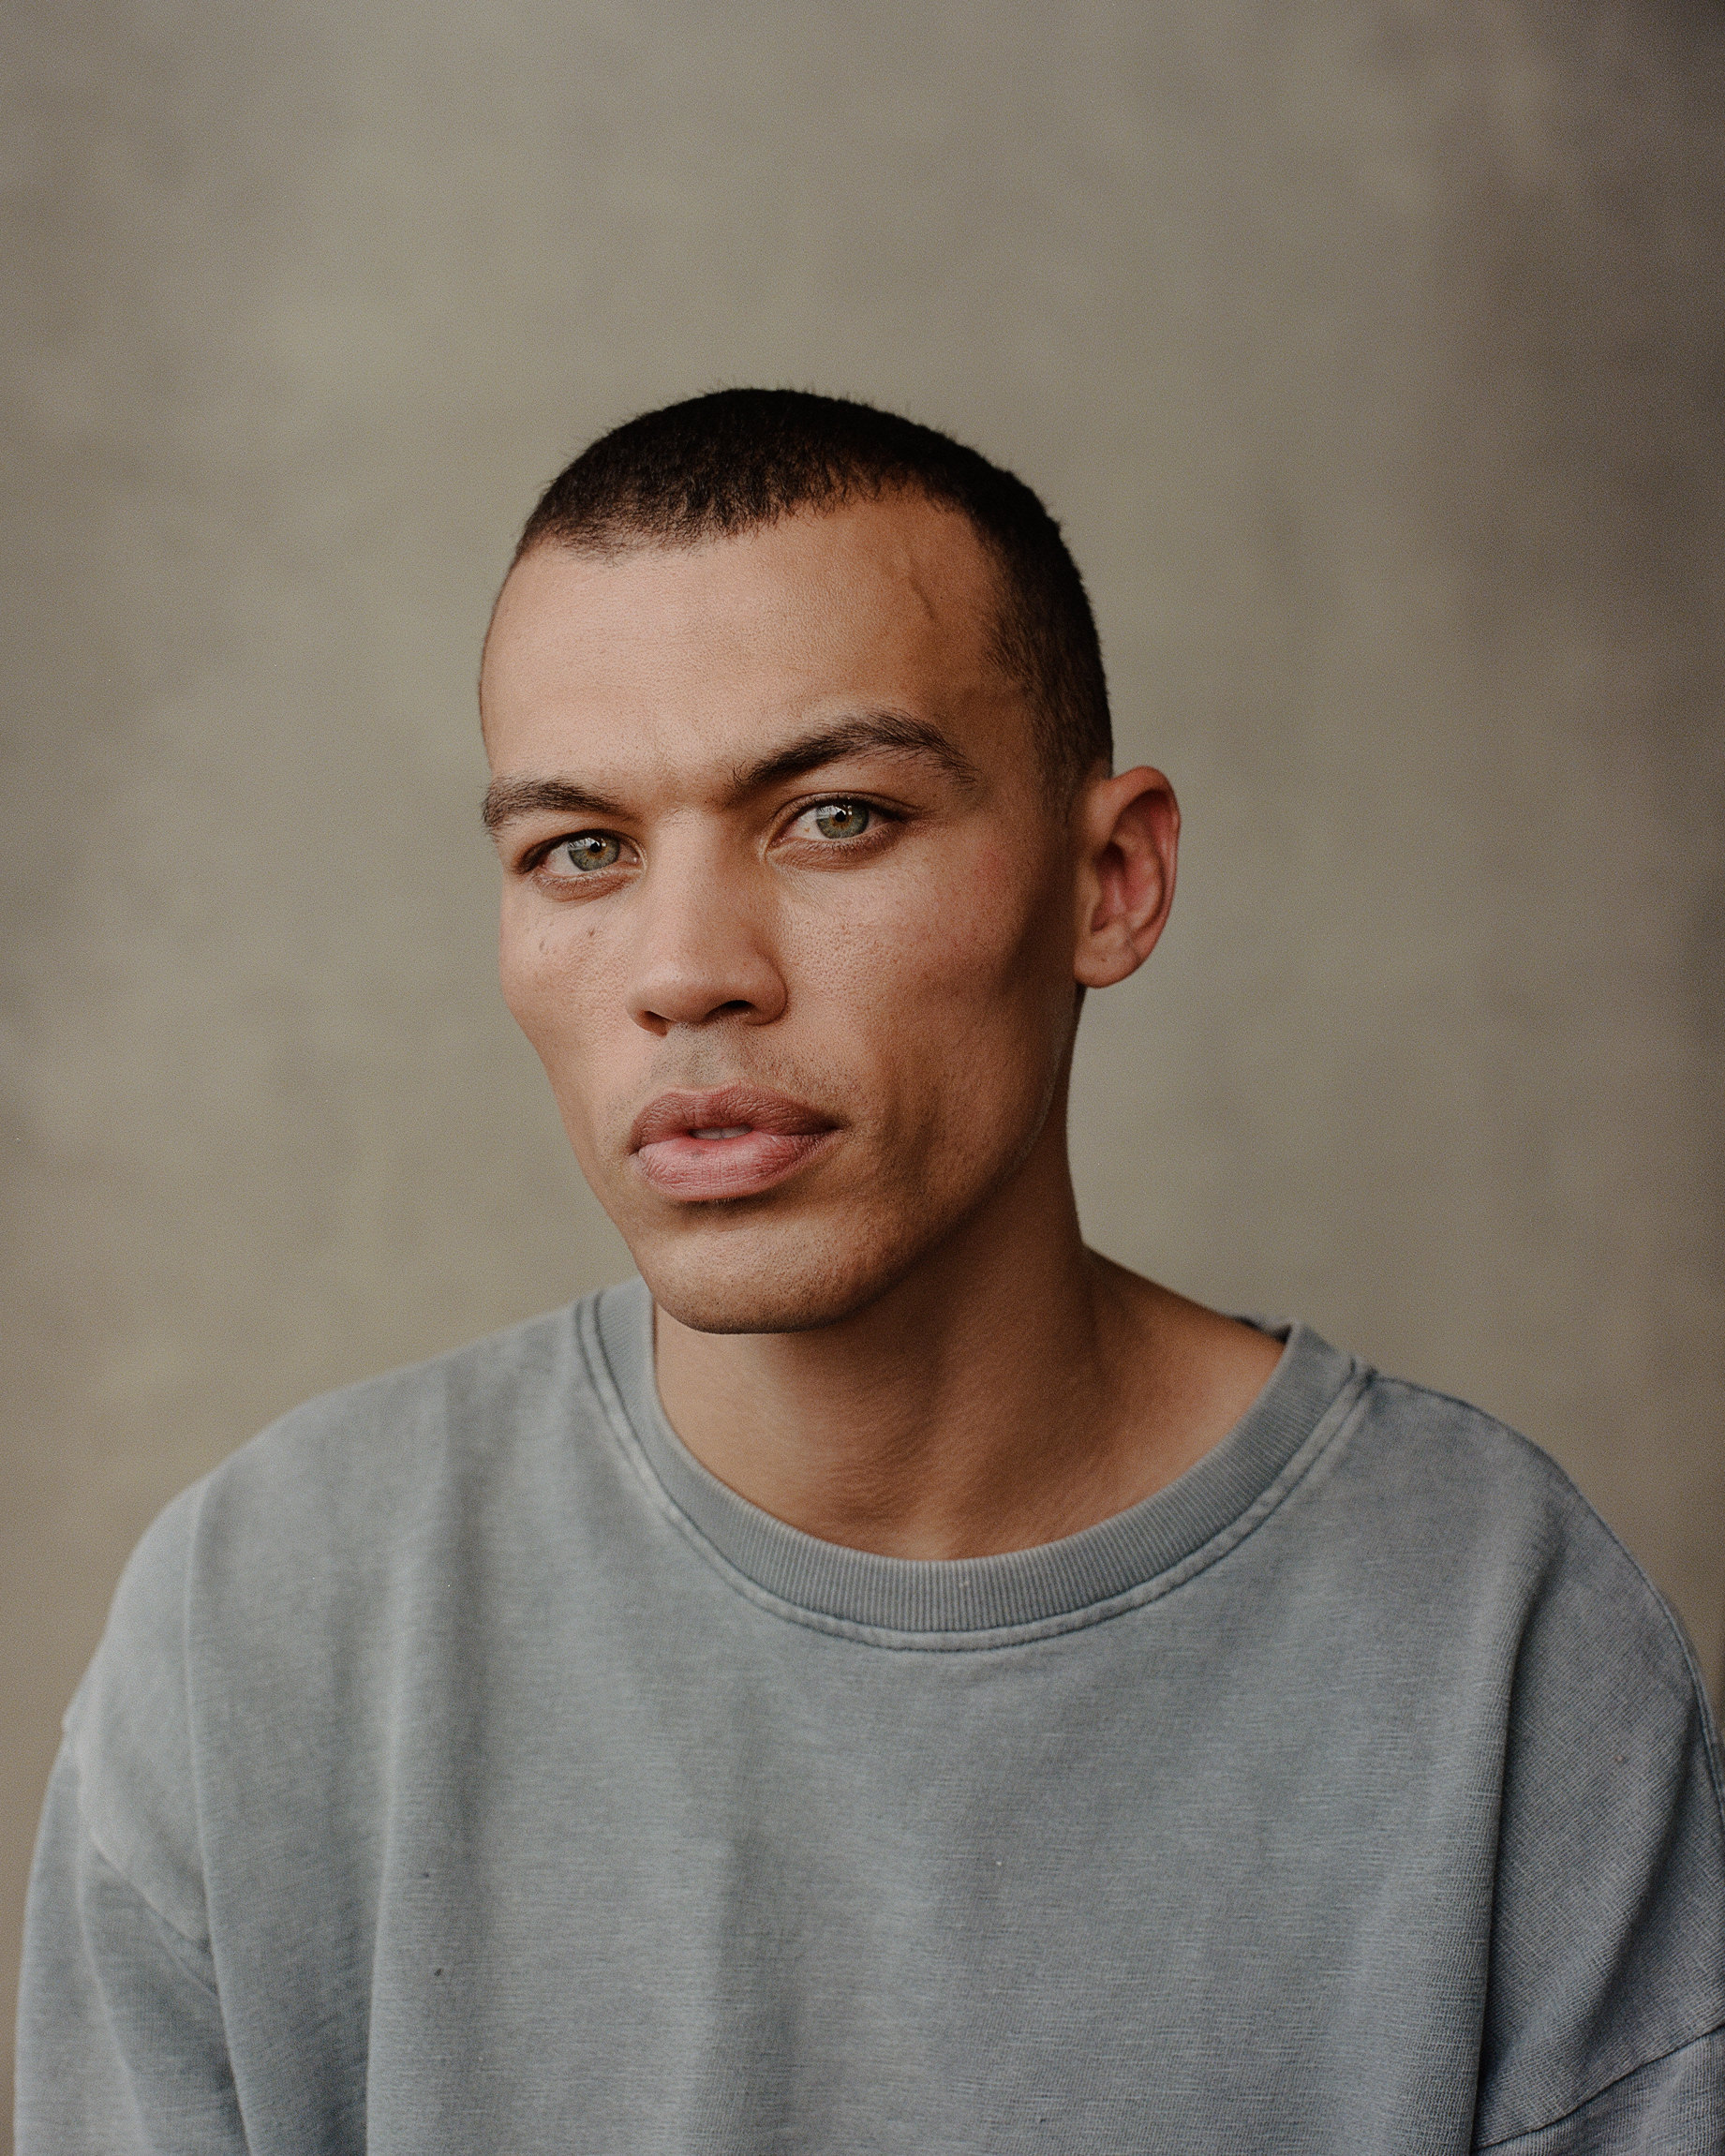 Dudley O'Shaughnessy - Independent Talent